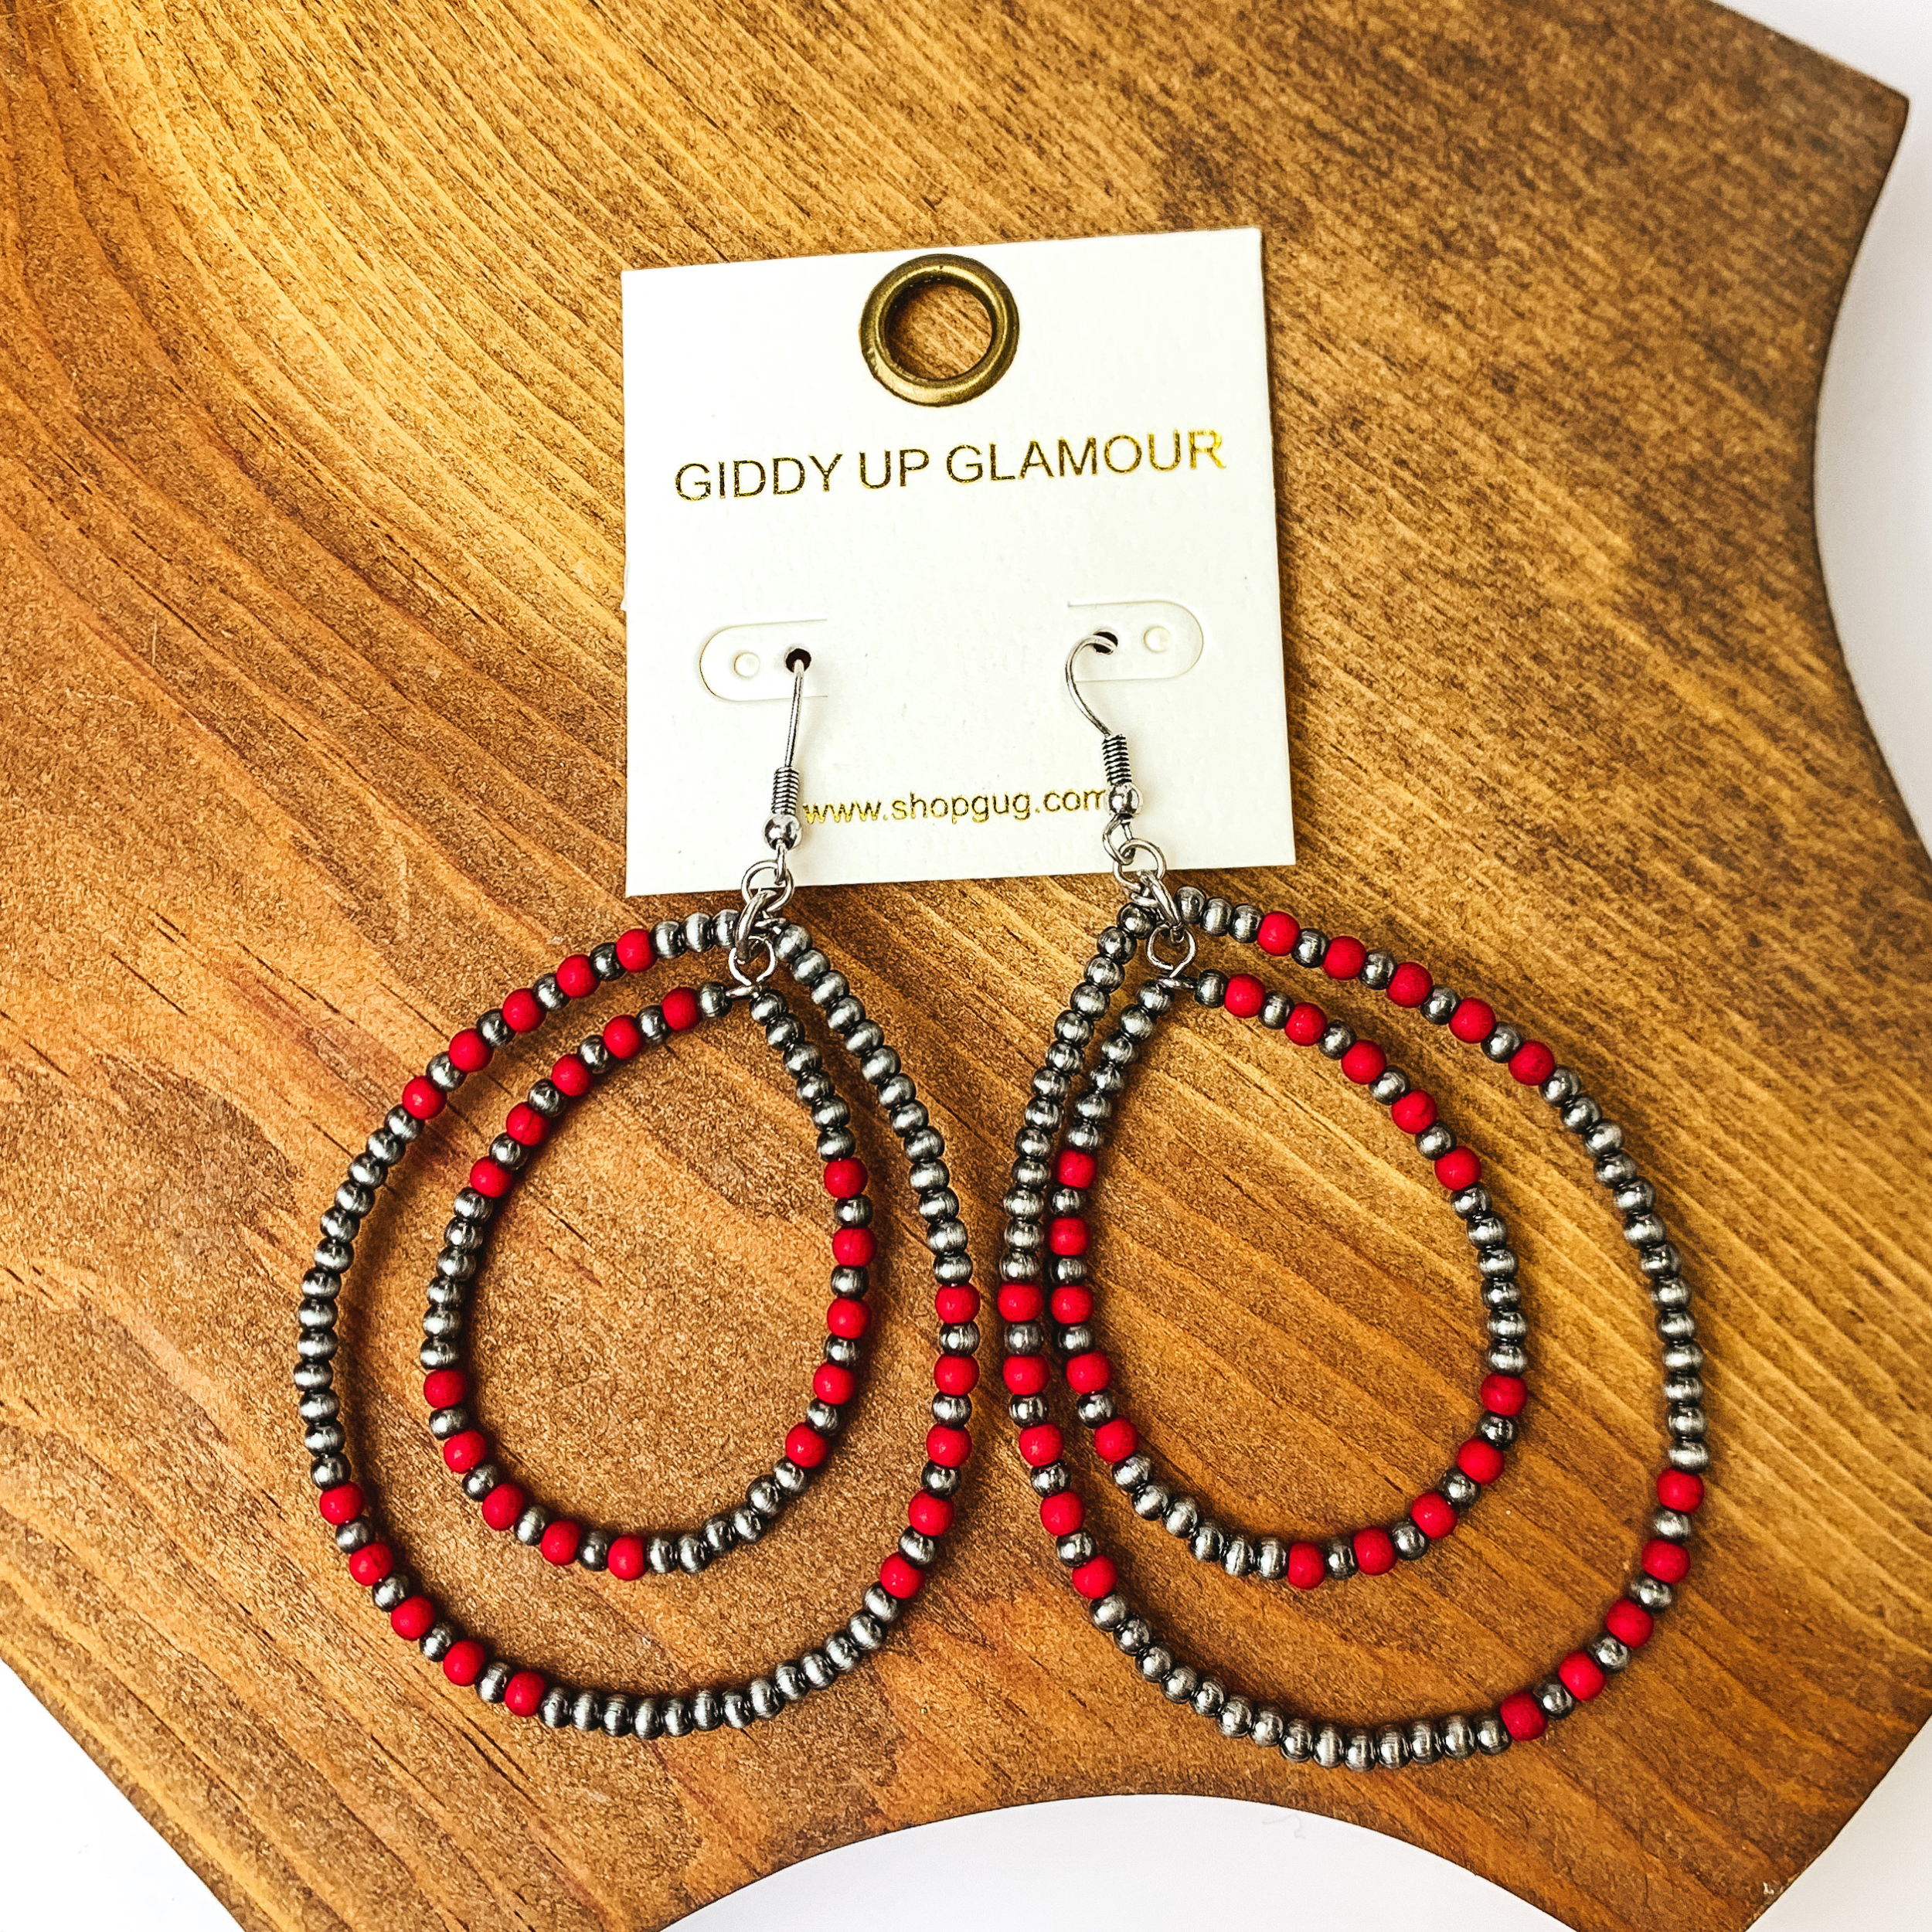 Beaded Open Double Drop Earrings in Silver Tone and Red. Pictured on a wood piece.